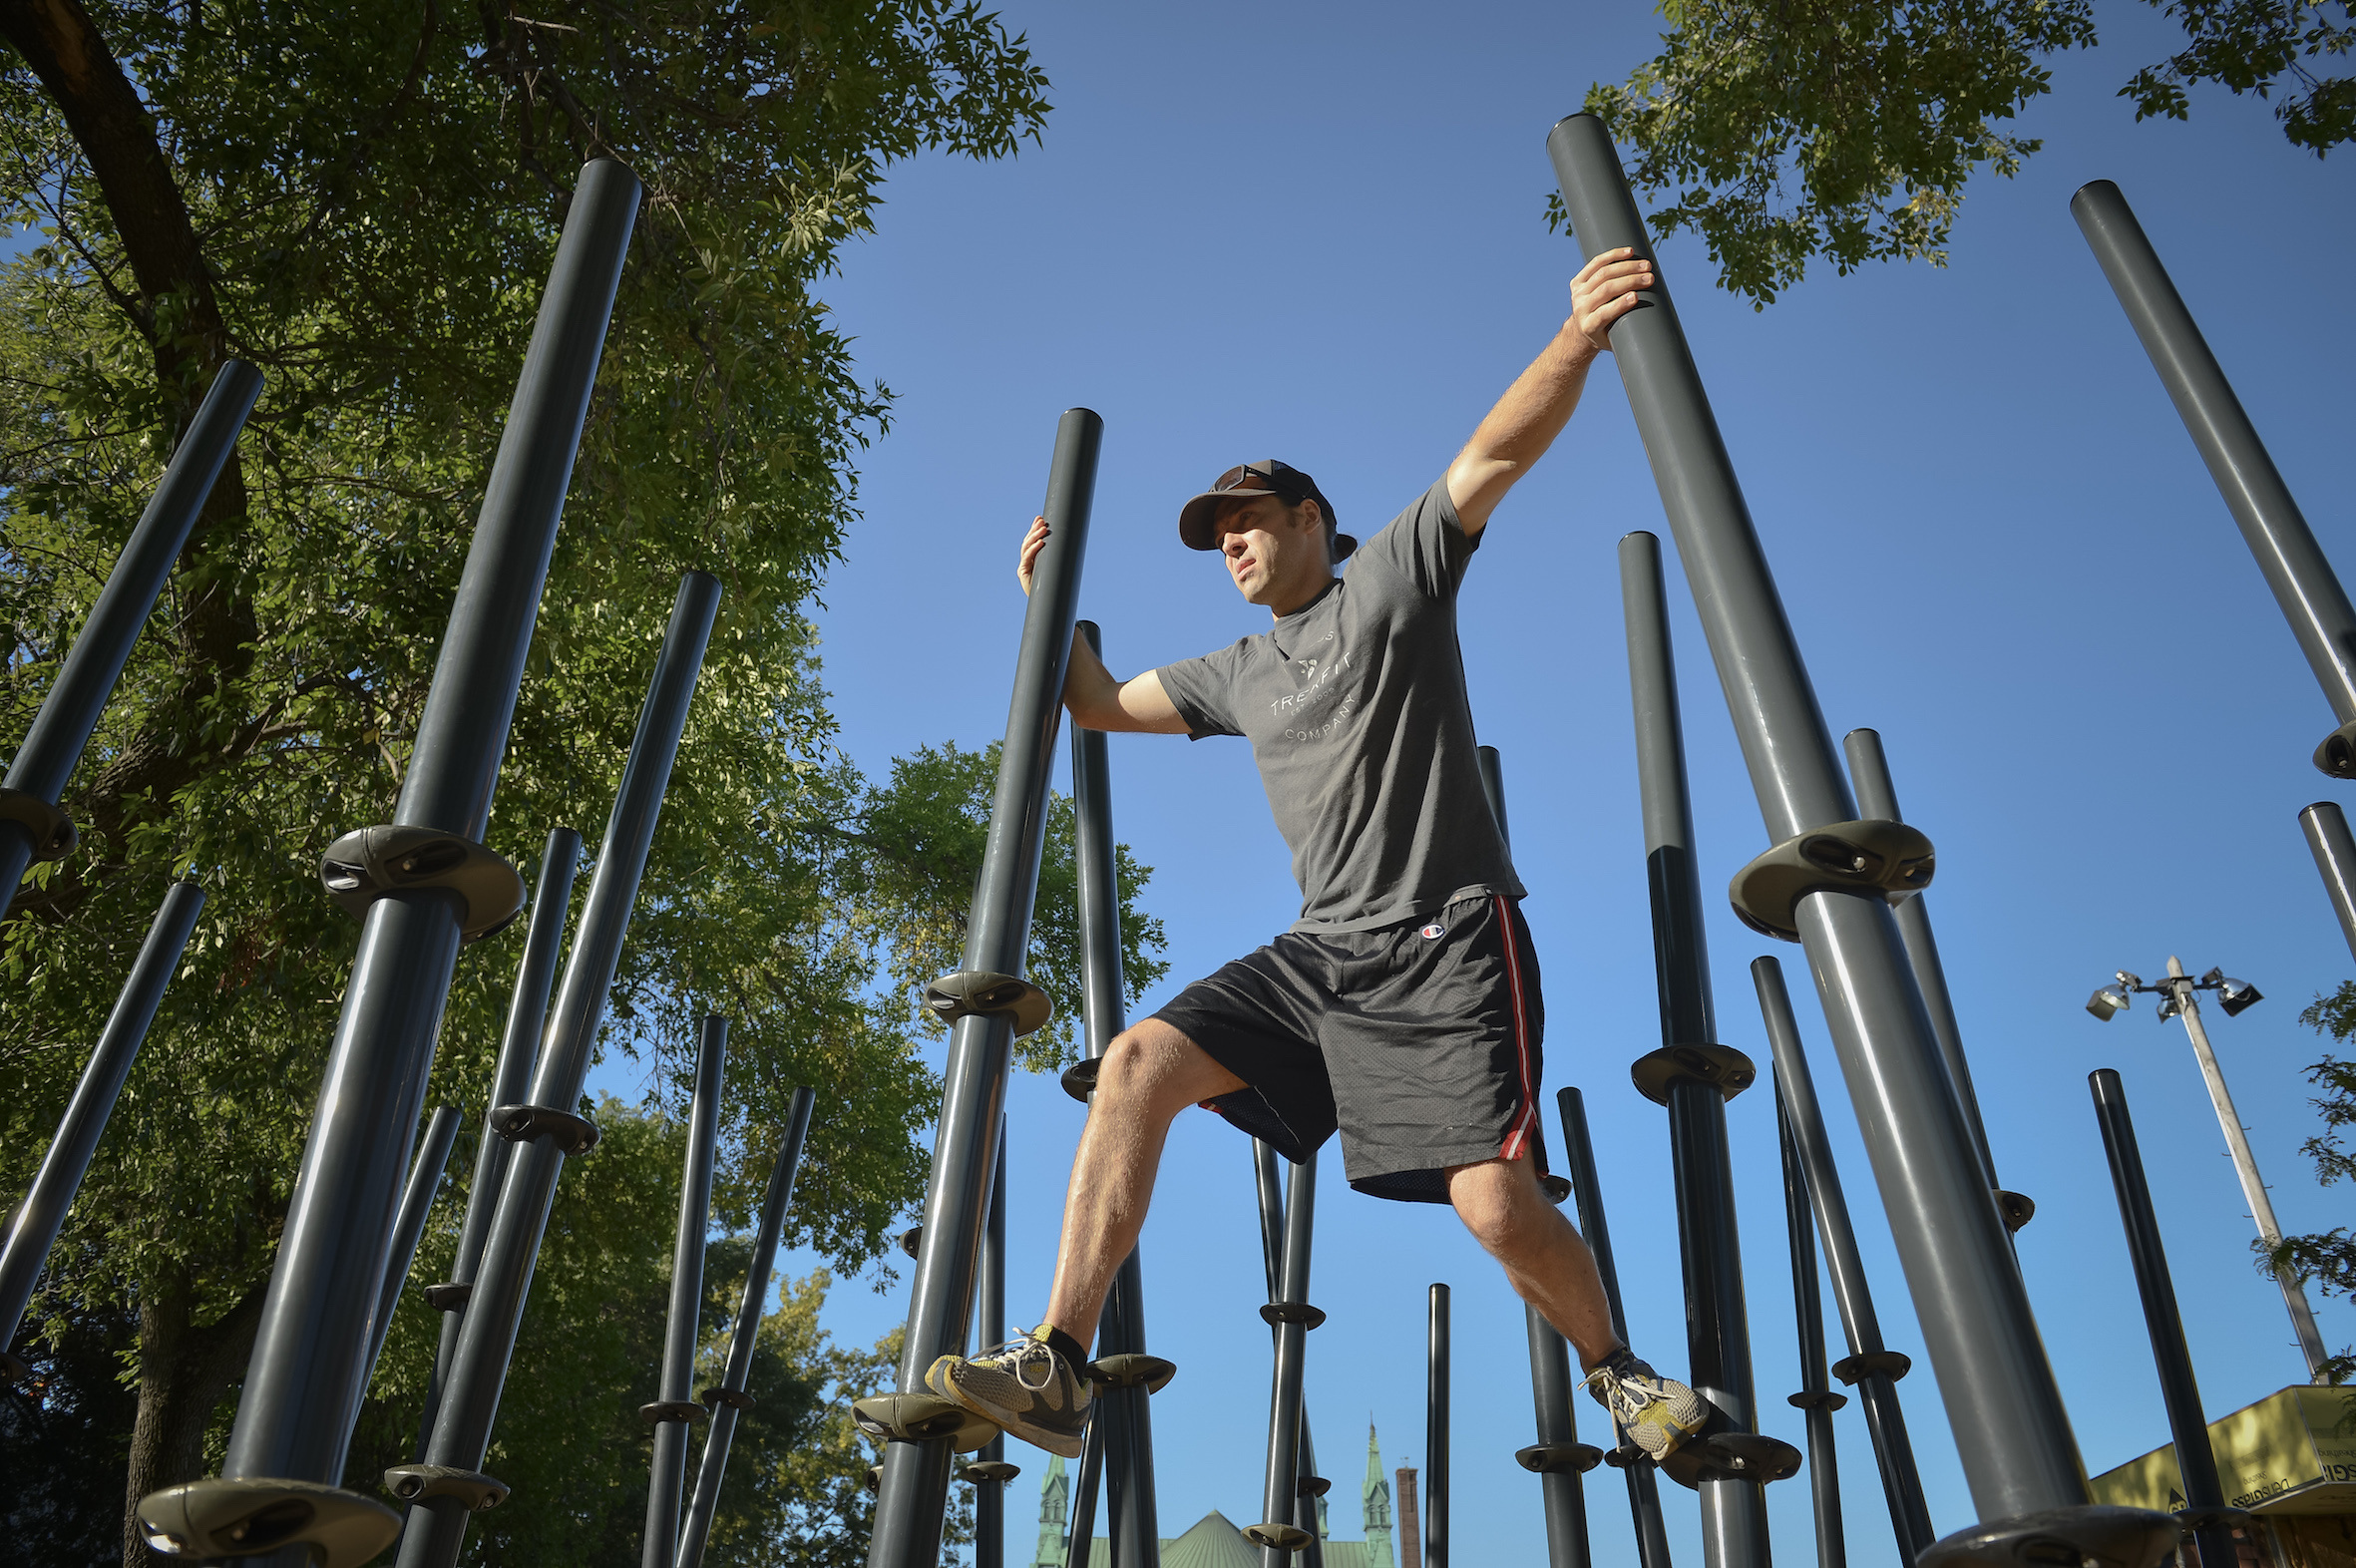 Outdoor fitness equipment for Calgary parks